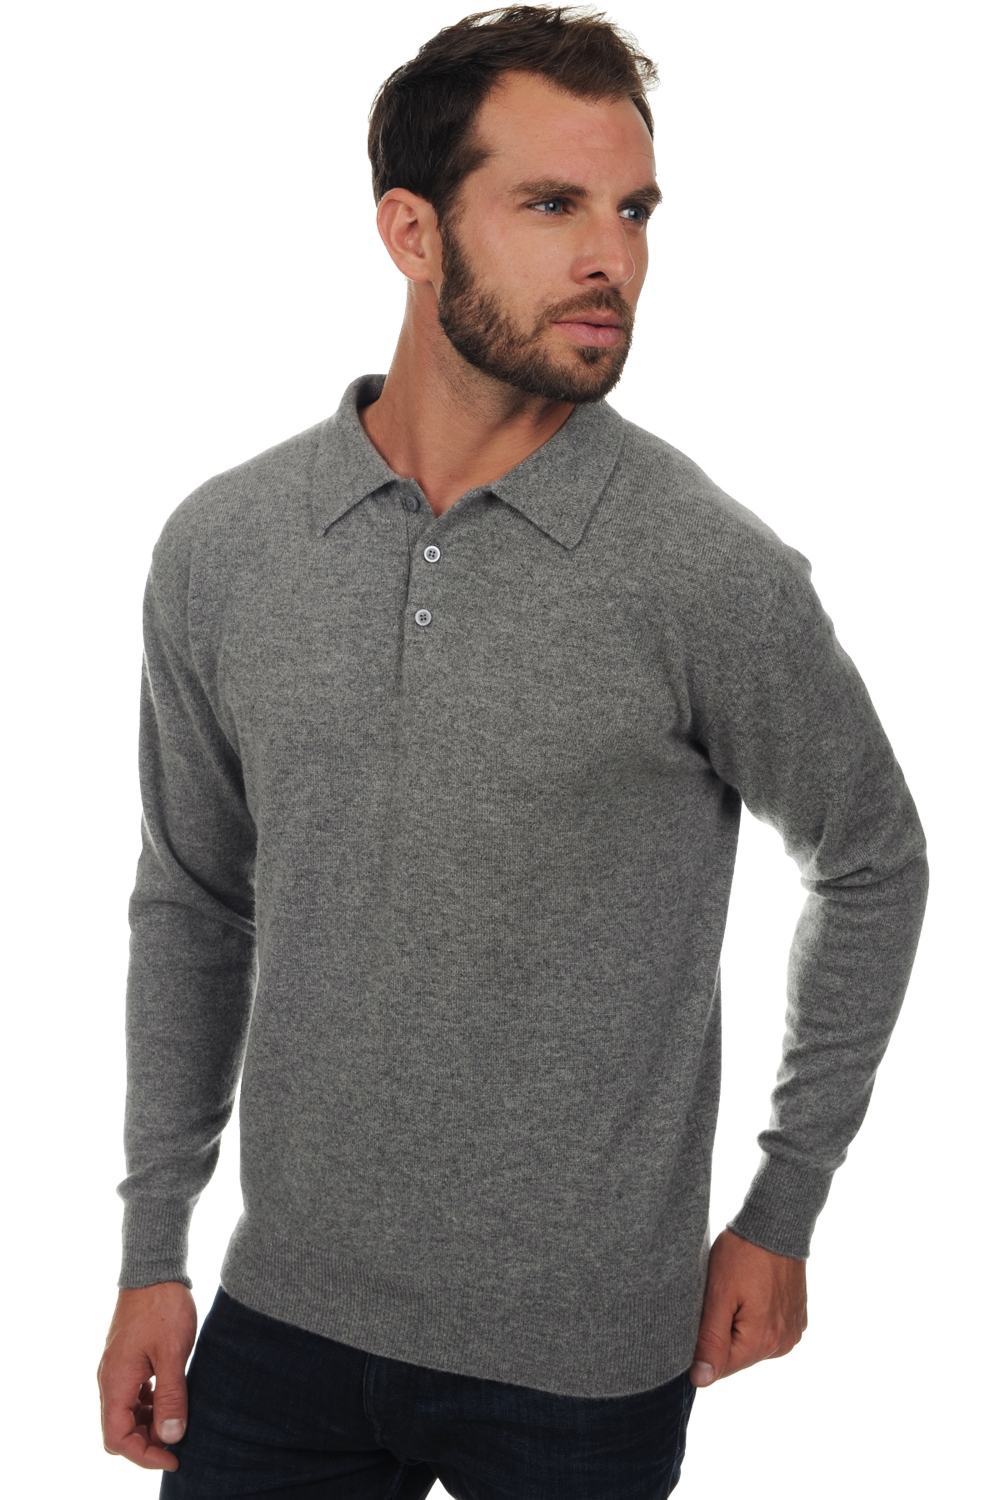 Cashmere men polo style sweaters alexandre grey marl m